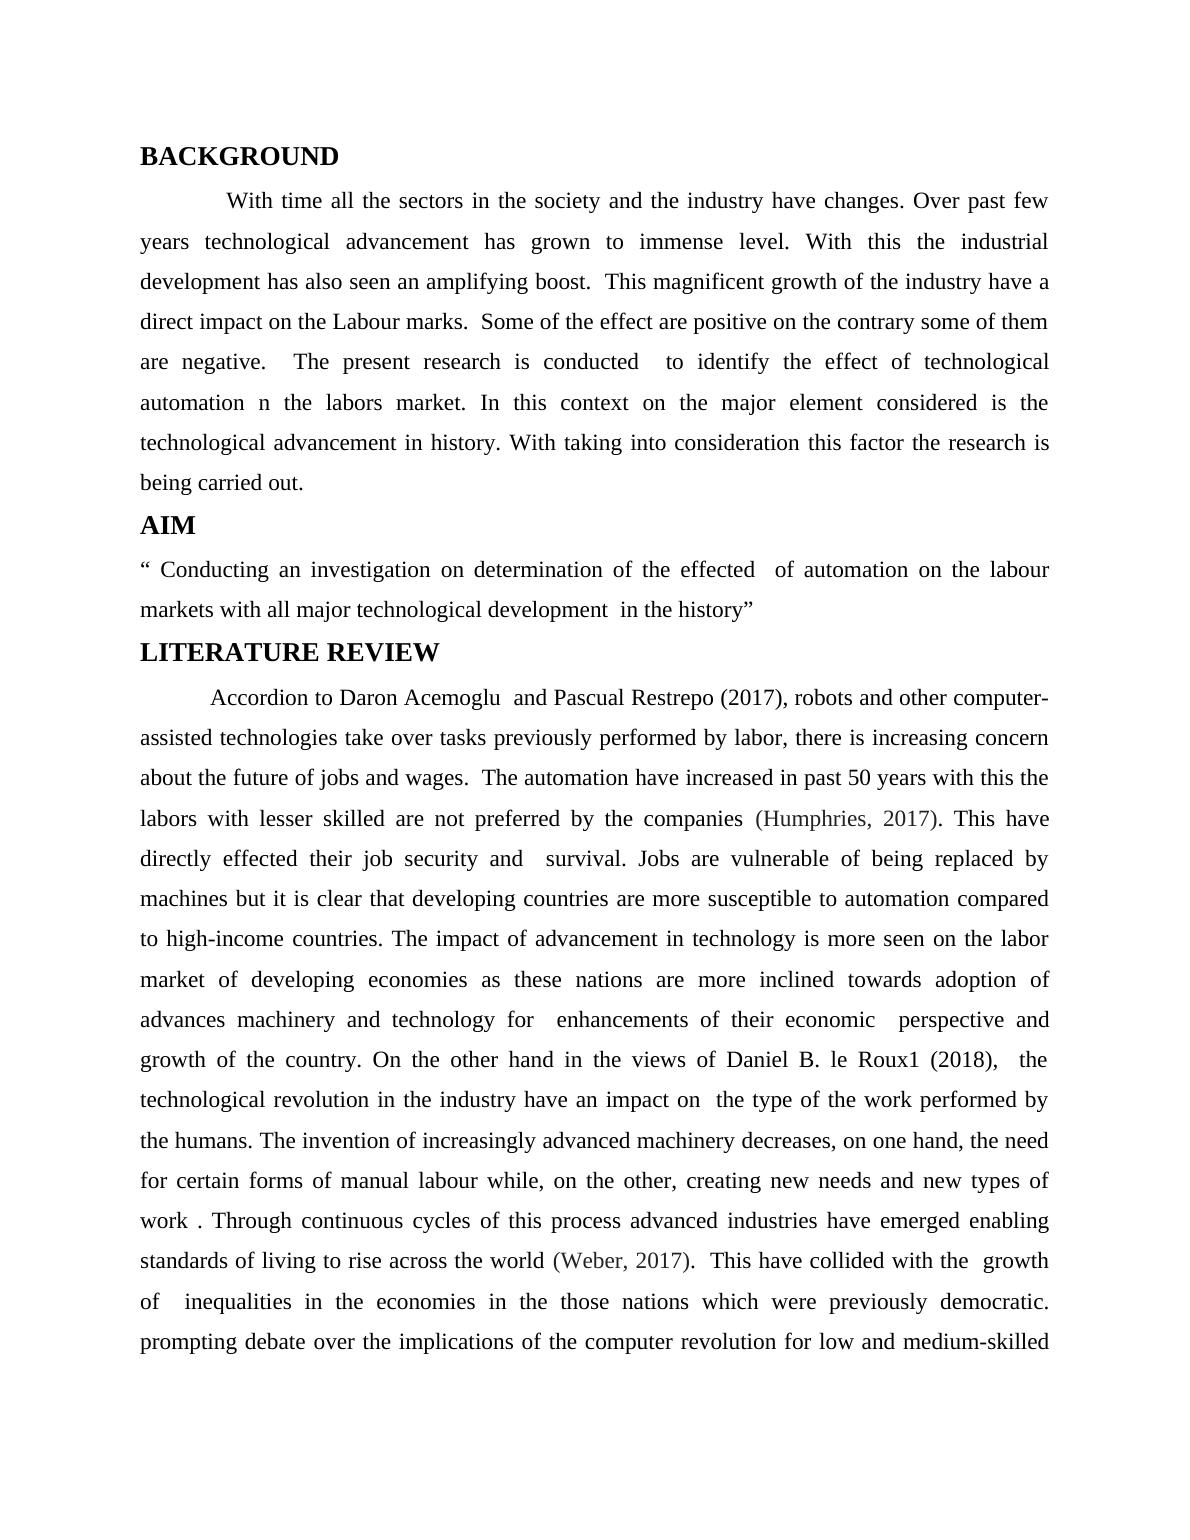 Effect of Technological Automation n the Labors Market PDF_3